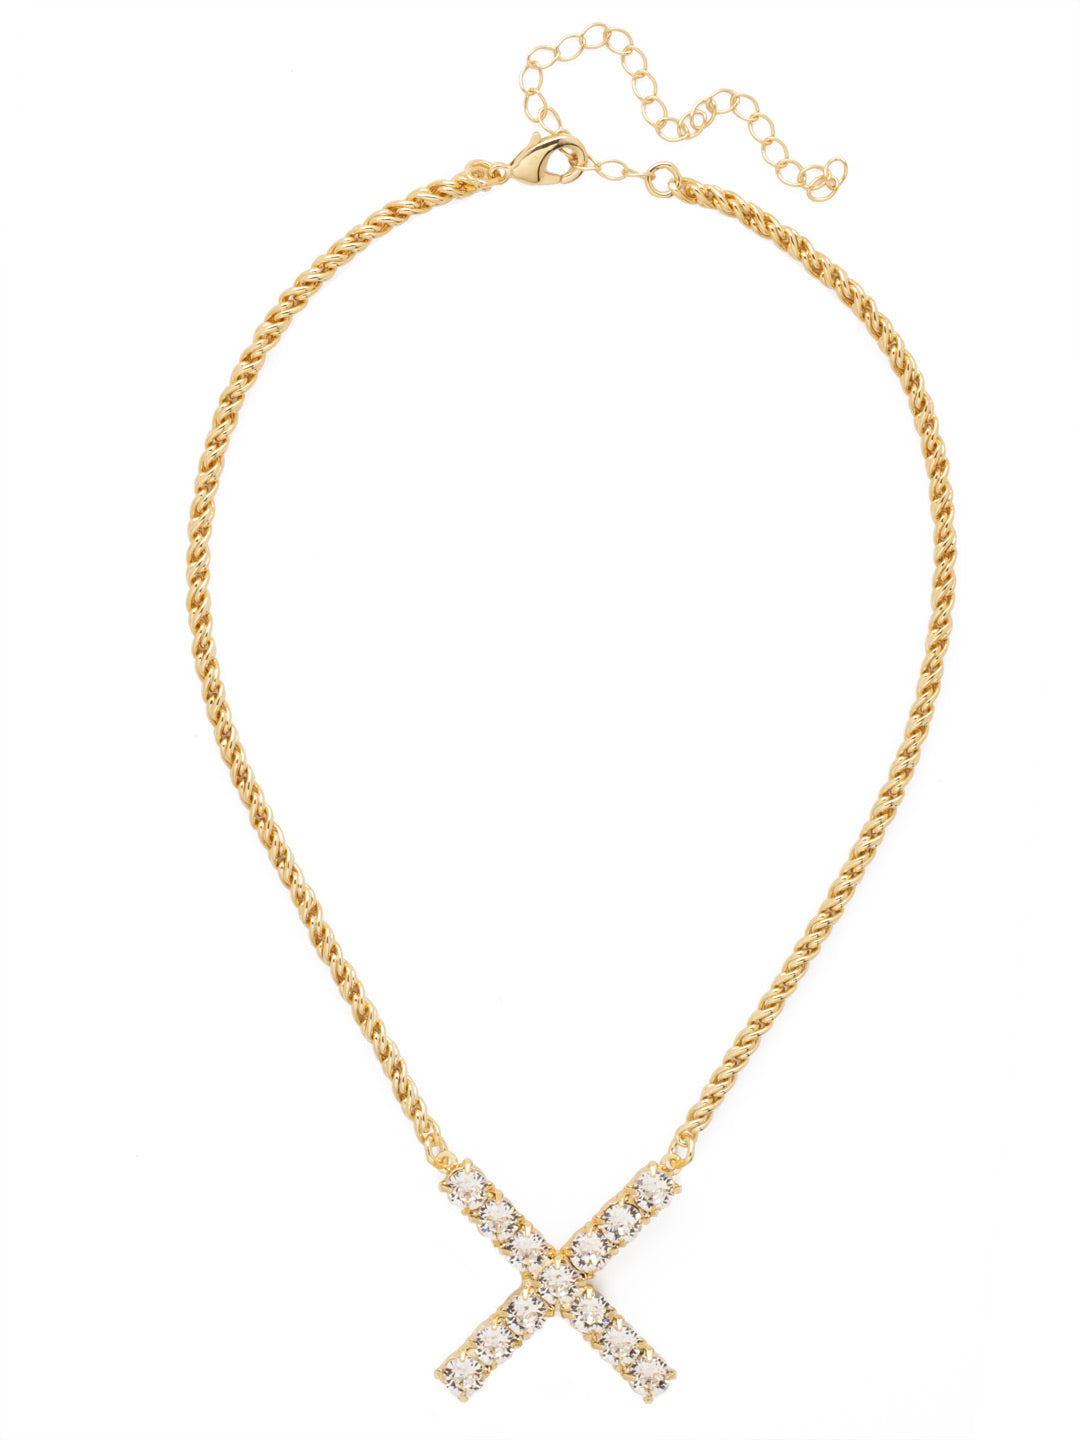 X Initial Rope Pendant Necklace - NFK43BGCRY - <p>The Initial Rope Pendant Necklace features a crystal encrusted metal monogram pendant on an adjustable rope chain, secured with a lobster claw clasp. From Sorrelli's Crystal collection in our Bright Gold-tone finish.</p>